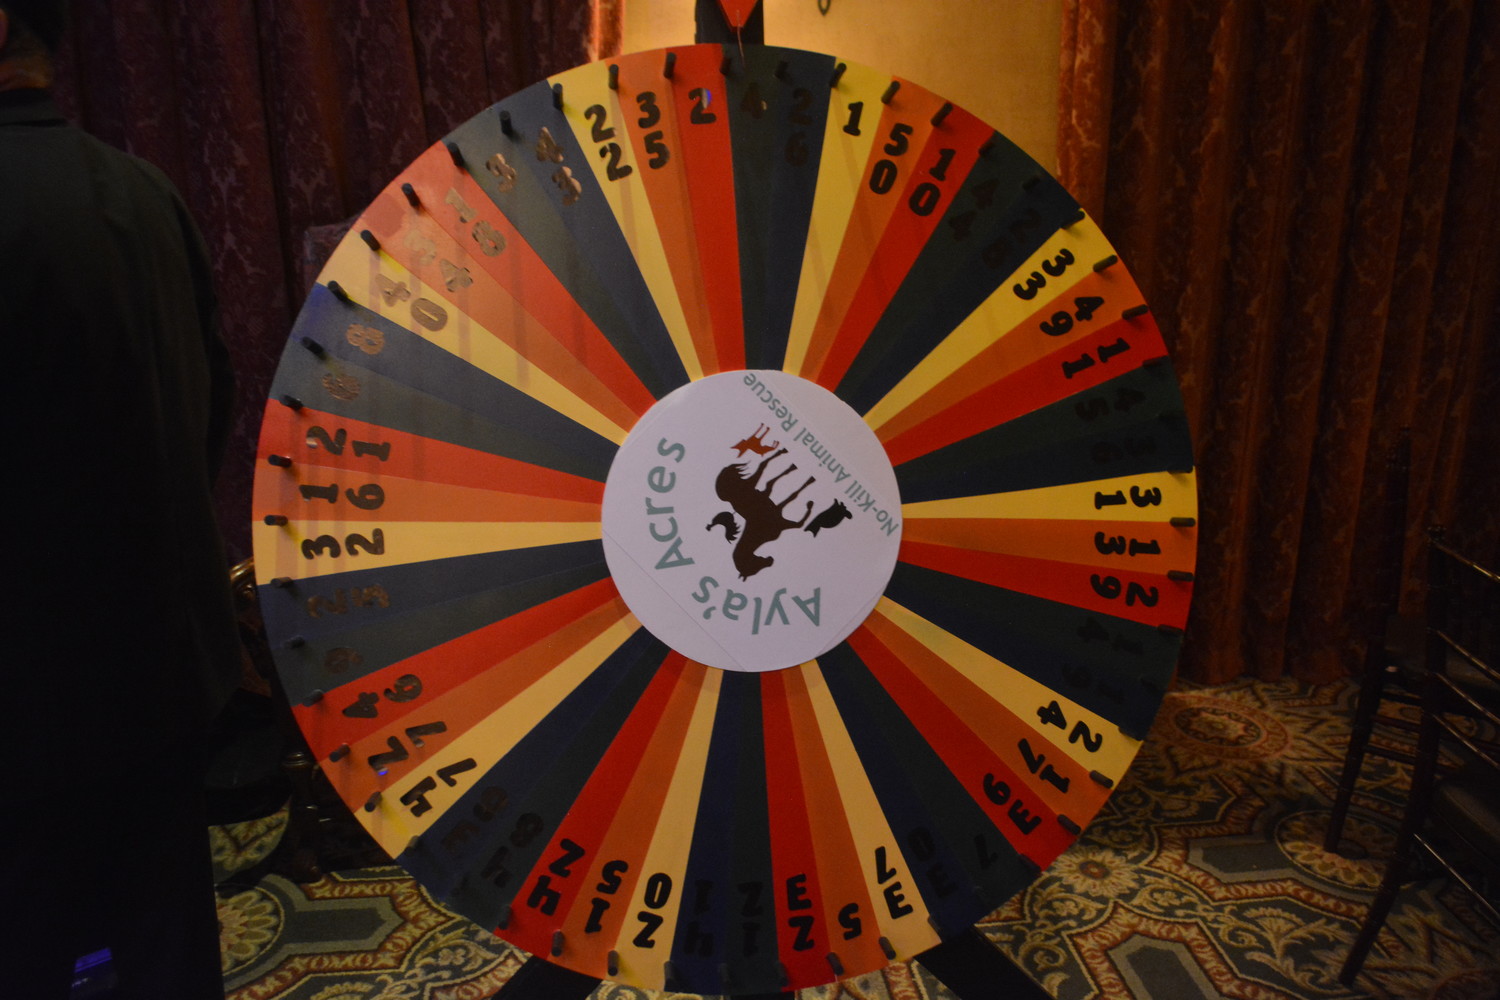 Guests won prizes if their ticket number corresponded with the number on the wheel.